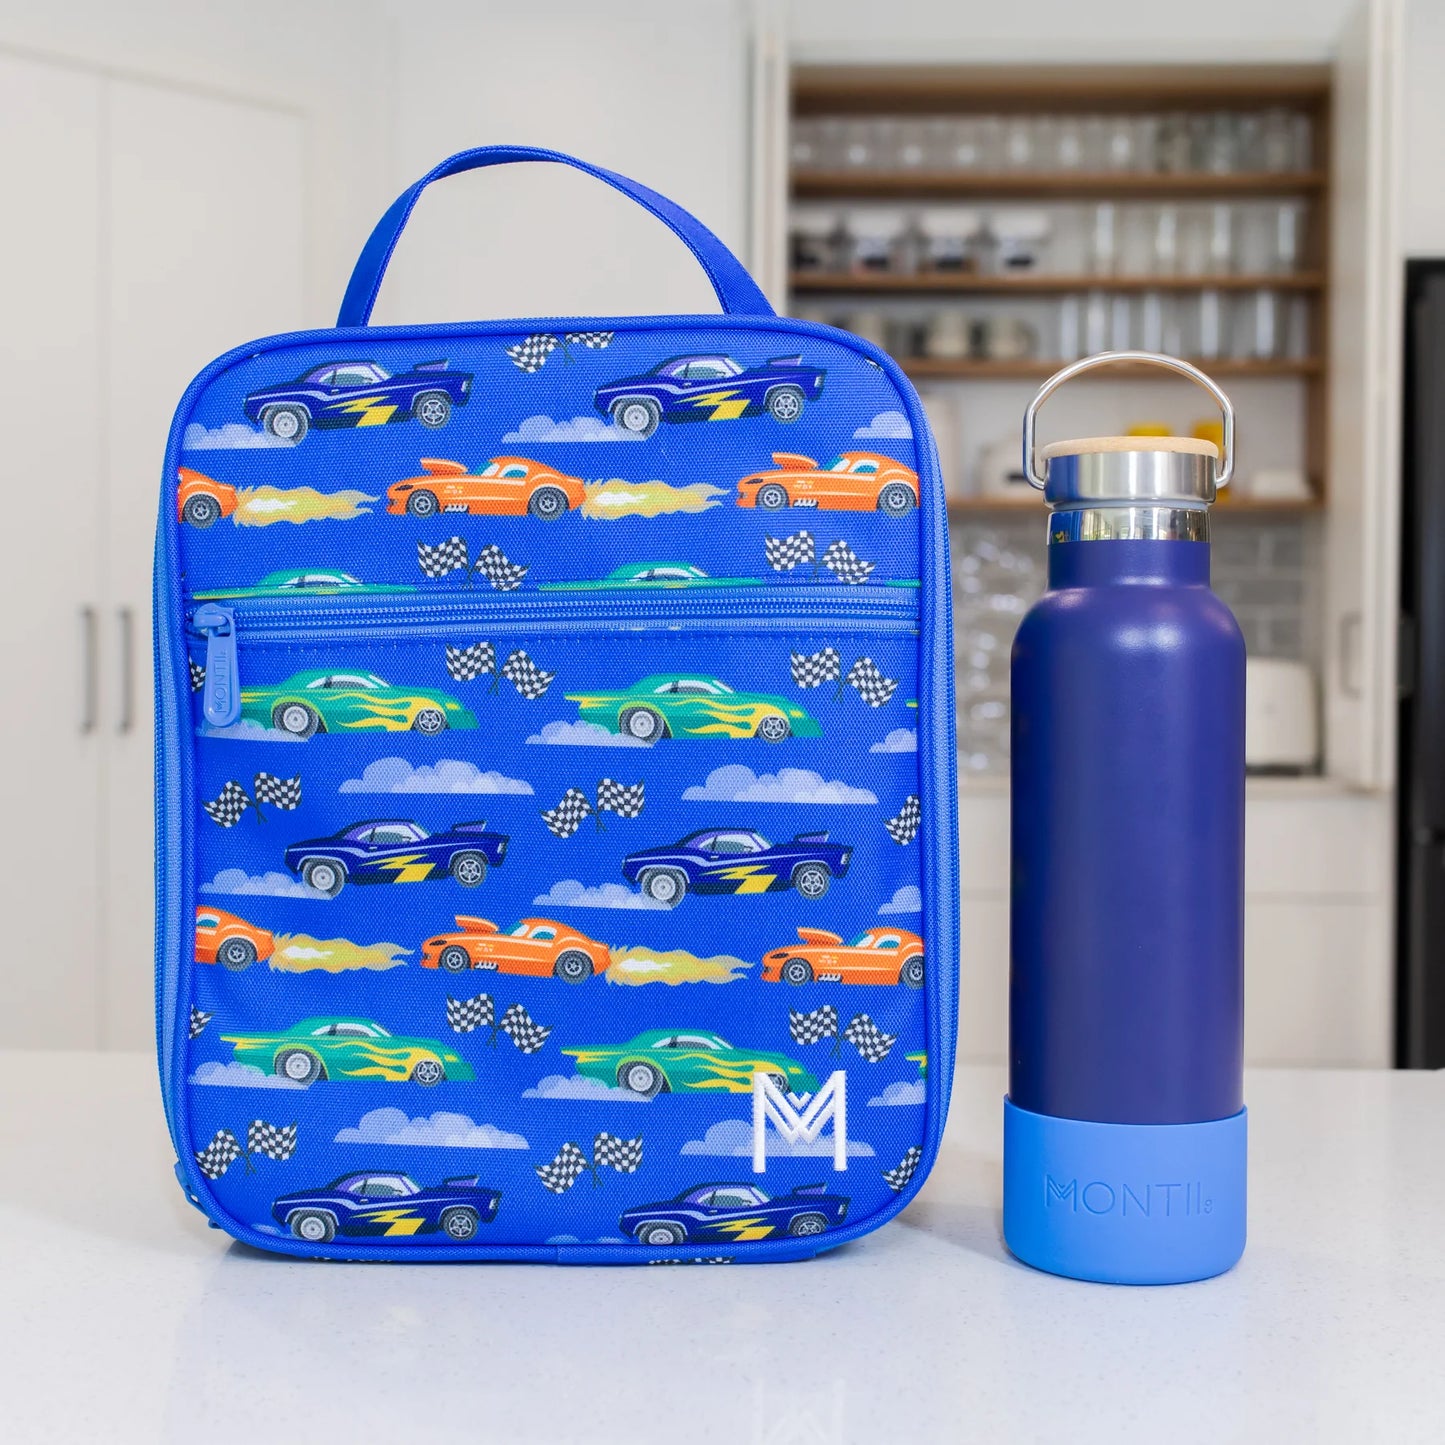 MONTIICO LARGE INSULATED LUNCH BAG - SPEED RACER